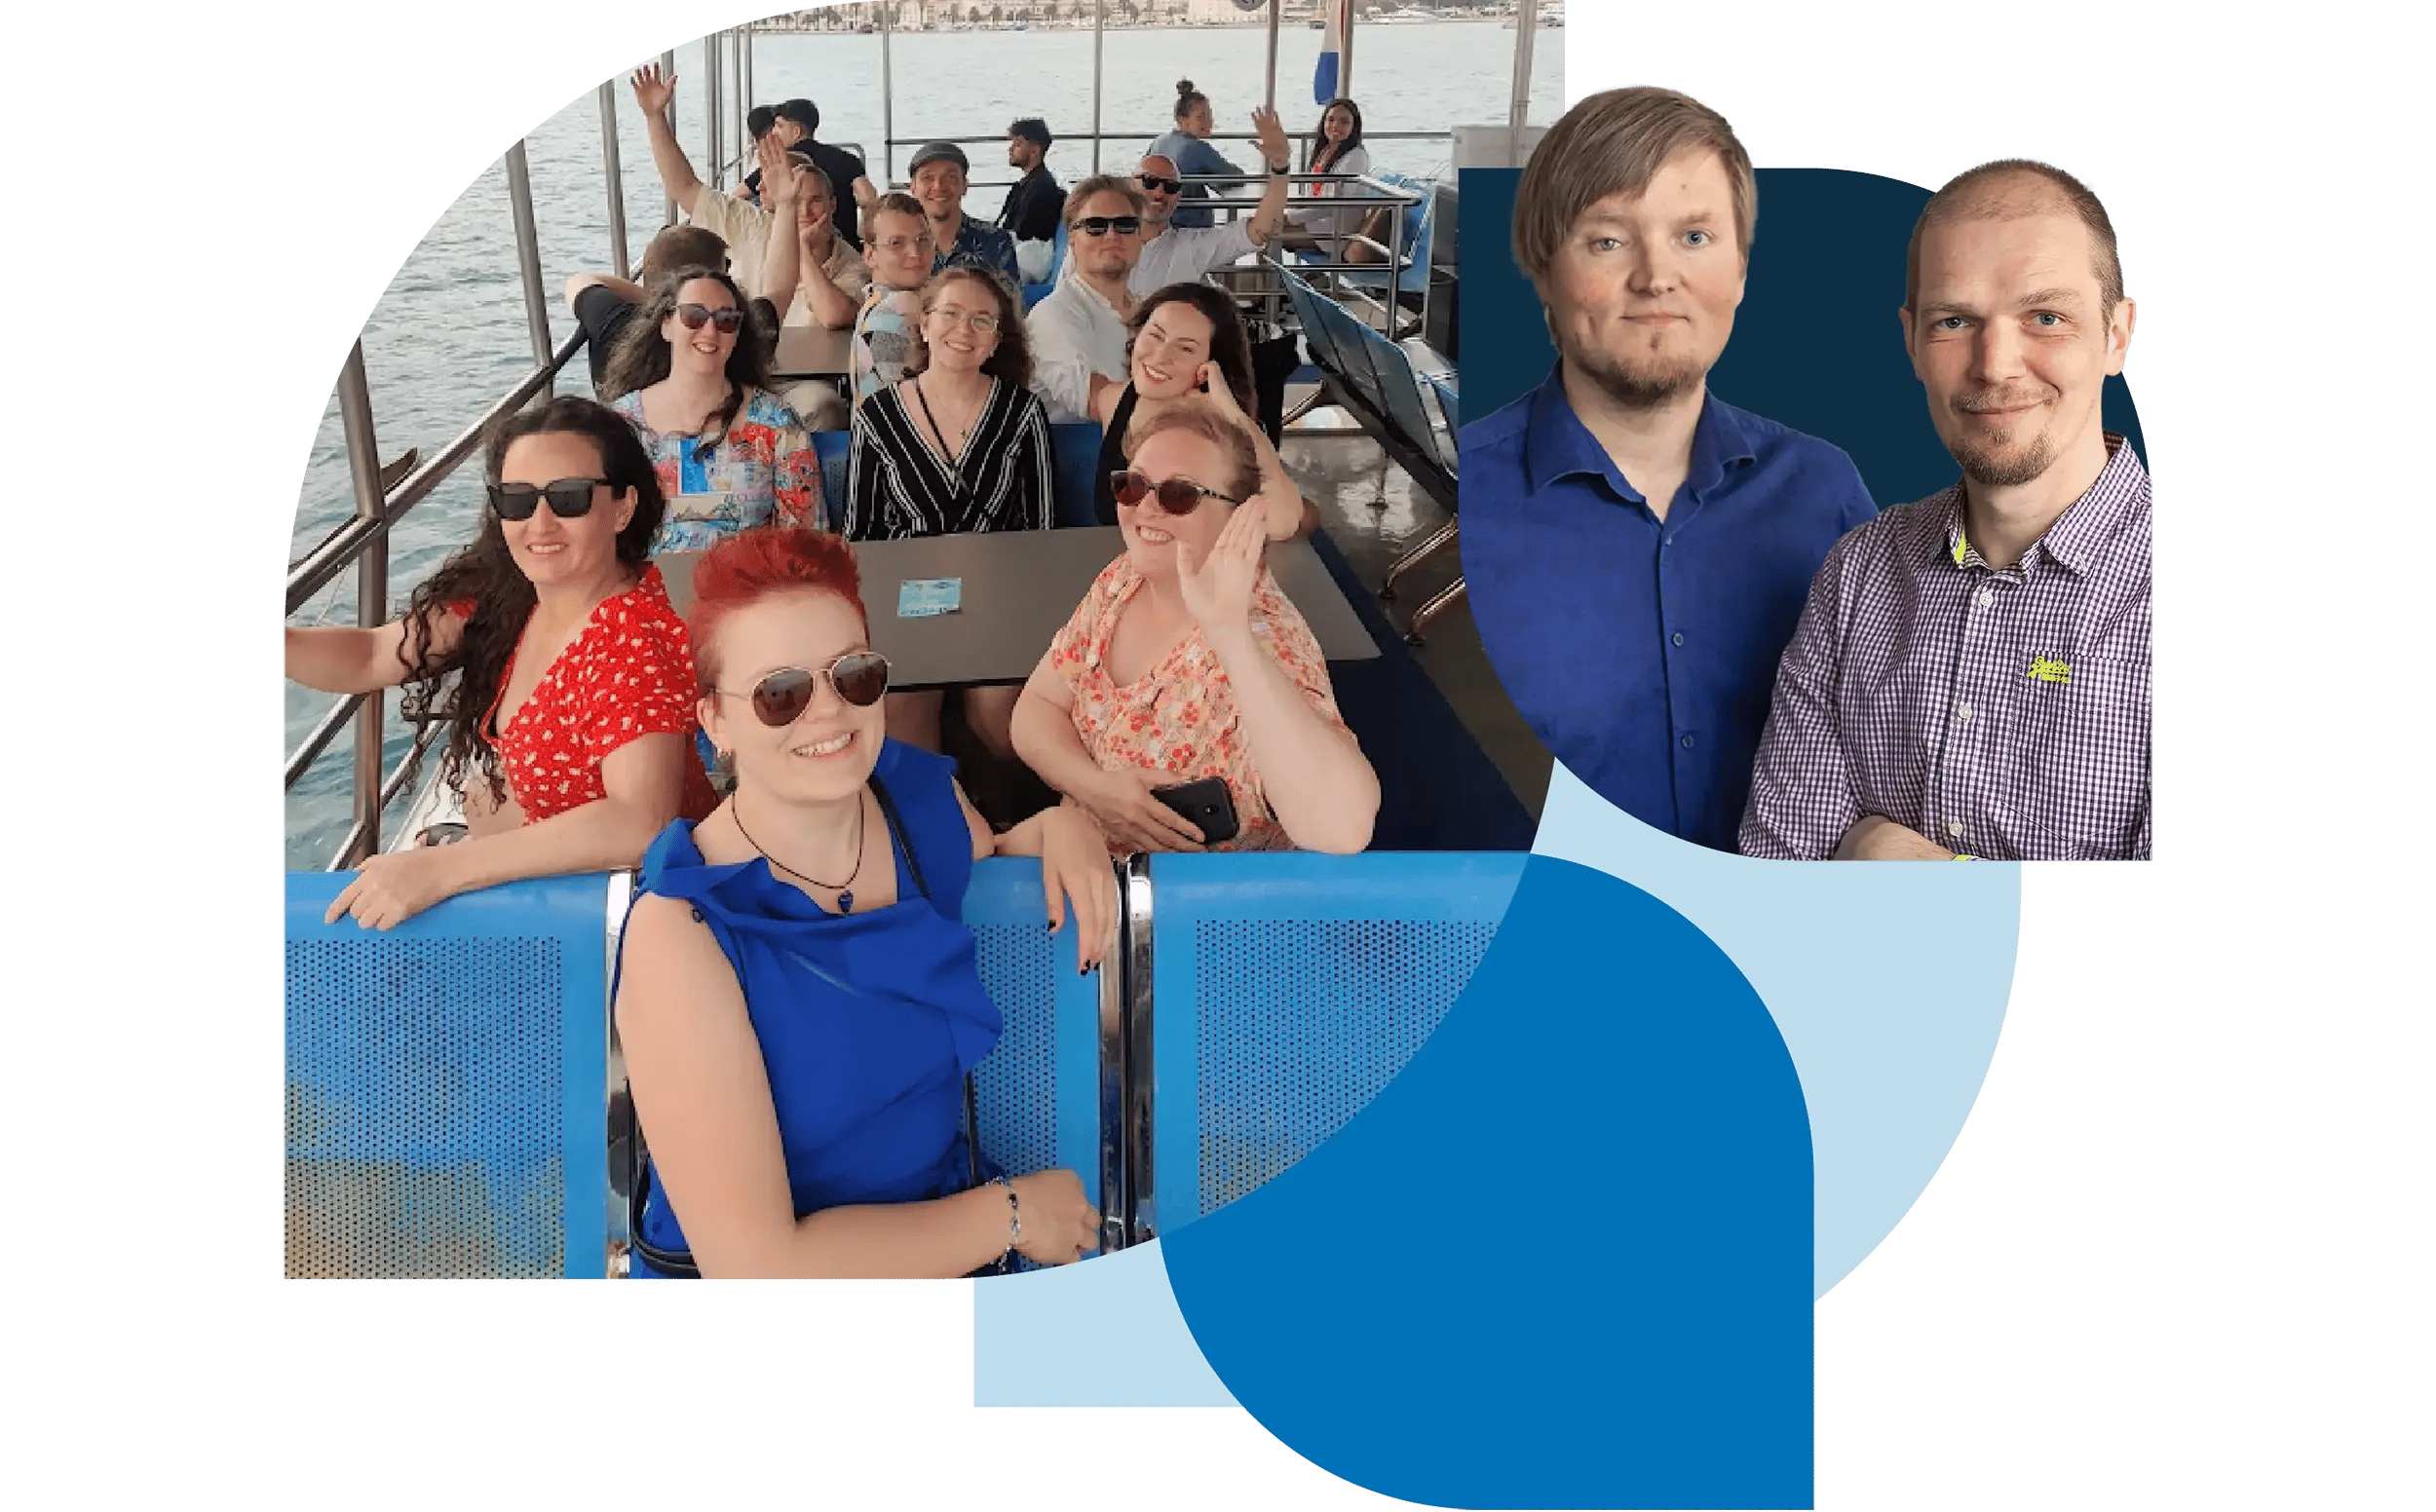 Join the Nursebuddy team (on a boat, in Croatia, at one of our get togethers)